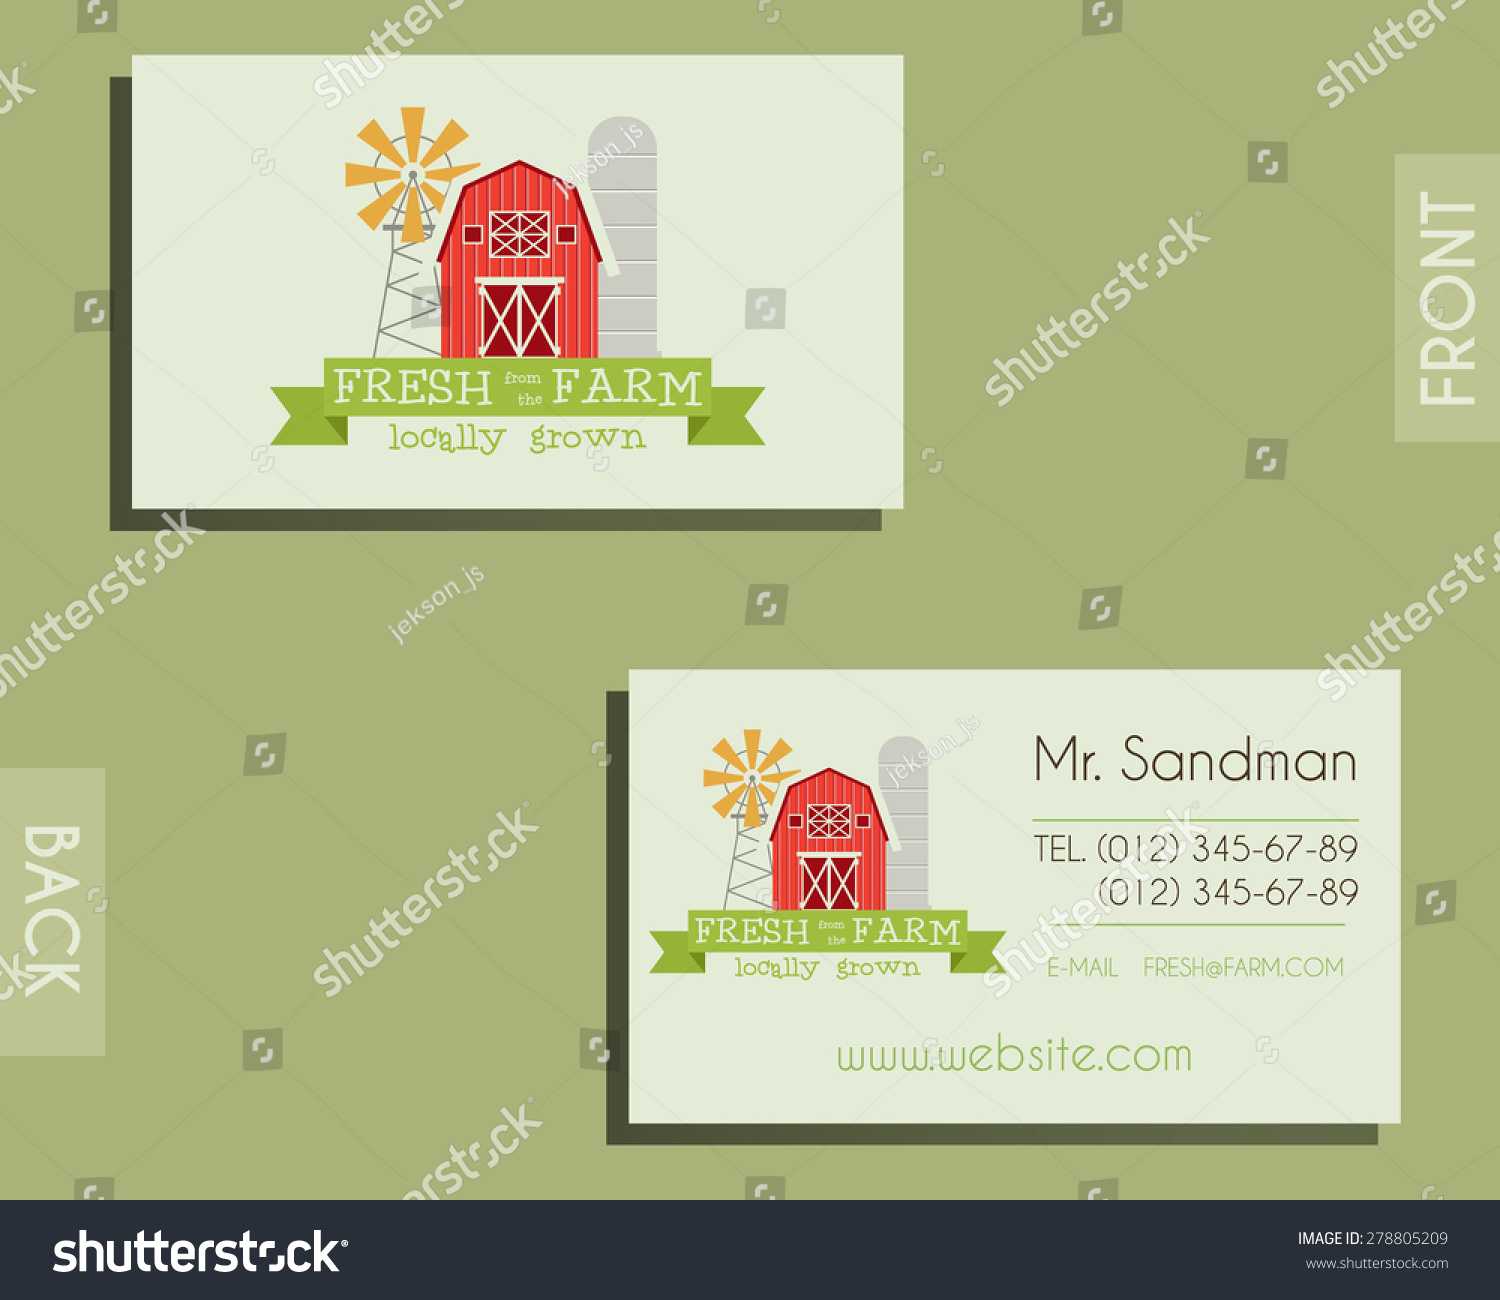 Eco Organic Visiting Card Template Natural Stock Vector With Bio Card Template